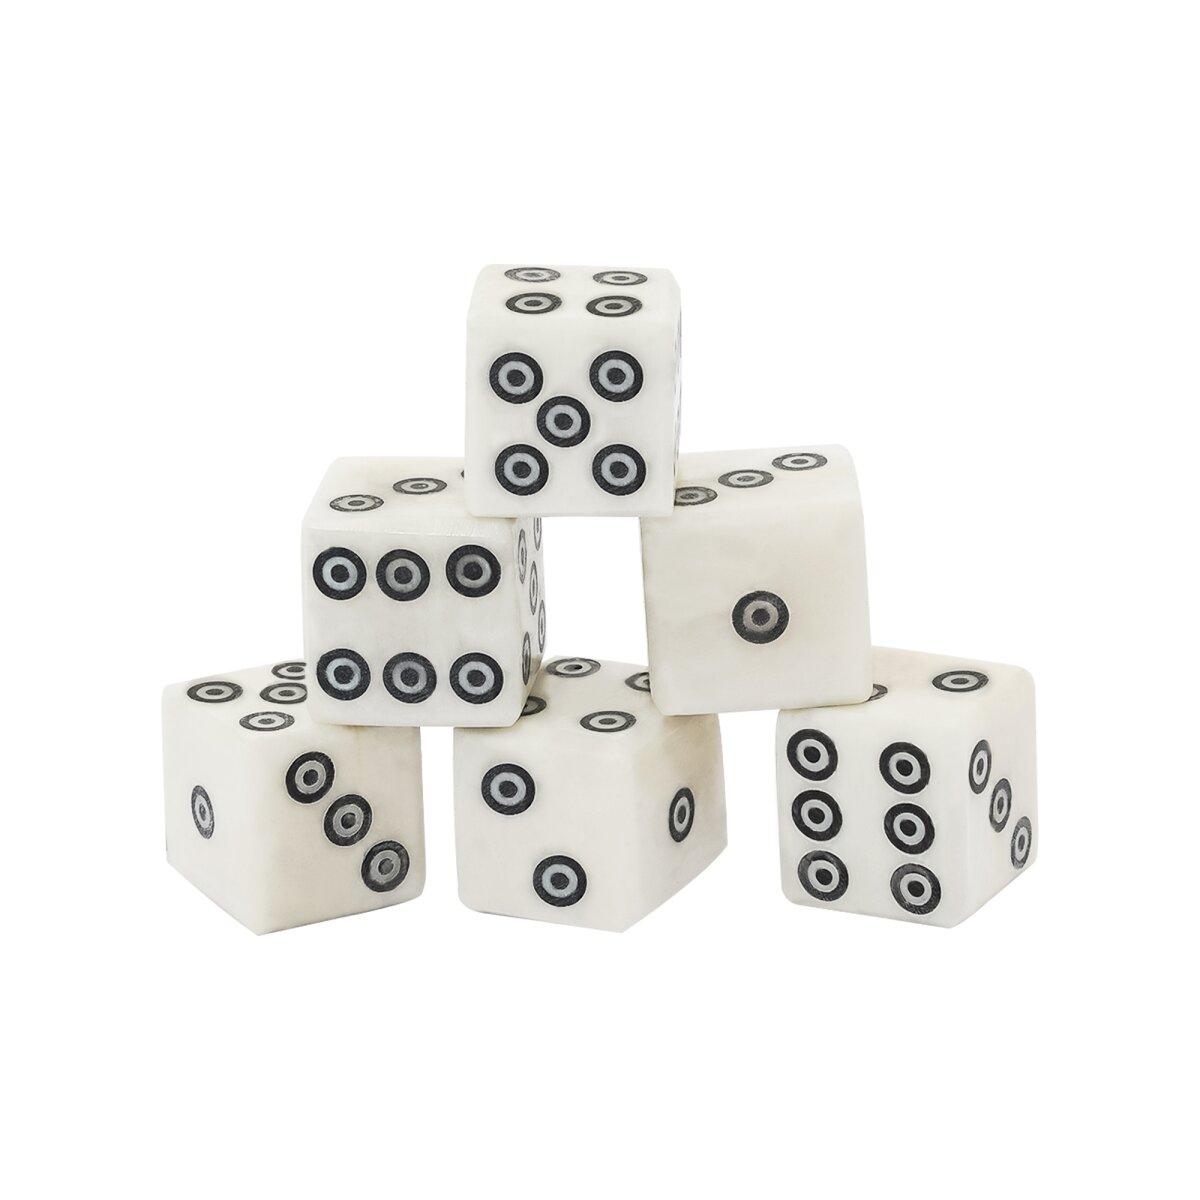 Bone Dice Set of 6 with Inlaid Pips Handcrafted Genuine...